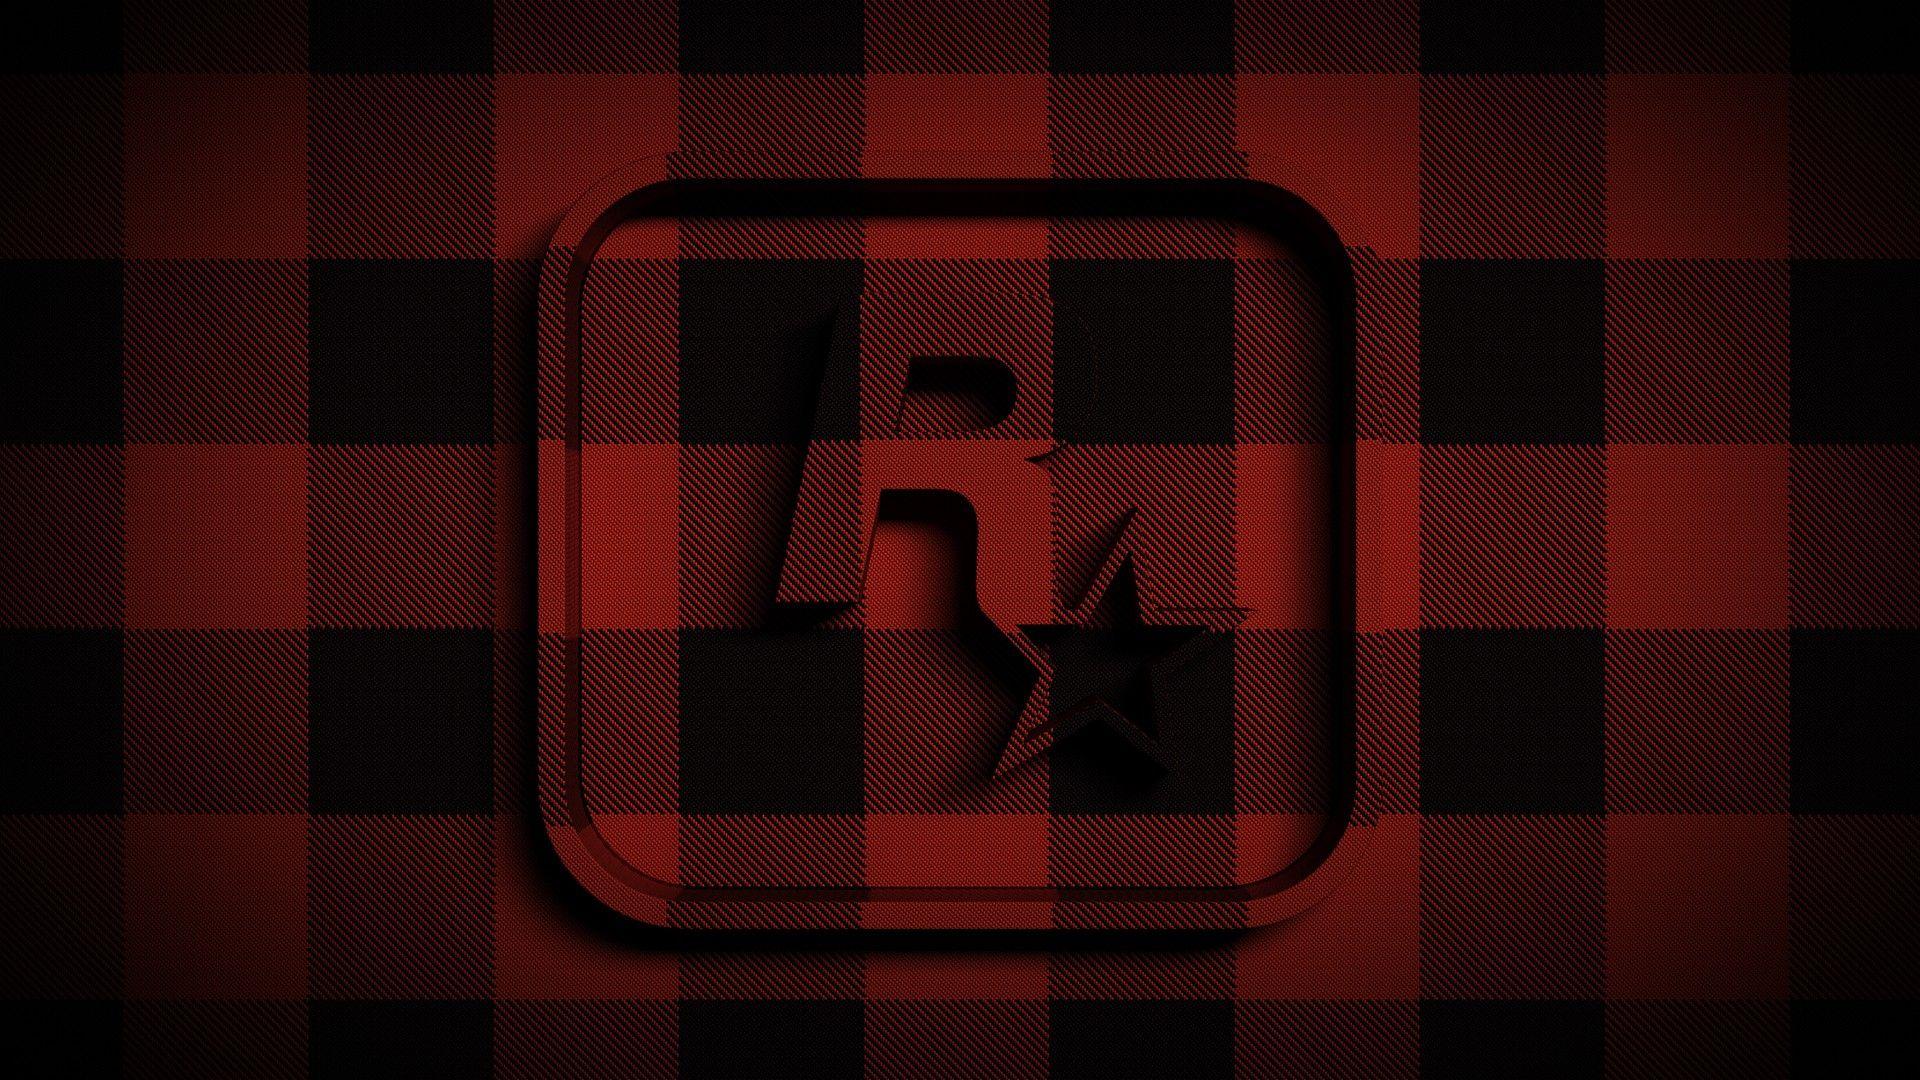 PC Rockstar Games Logo Wallpaper in Nice Collection